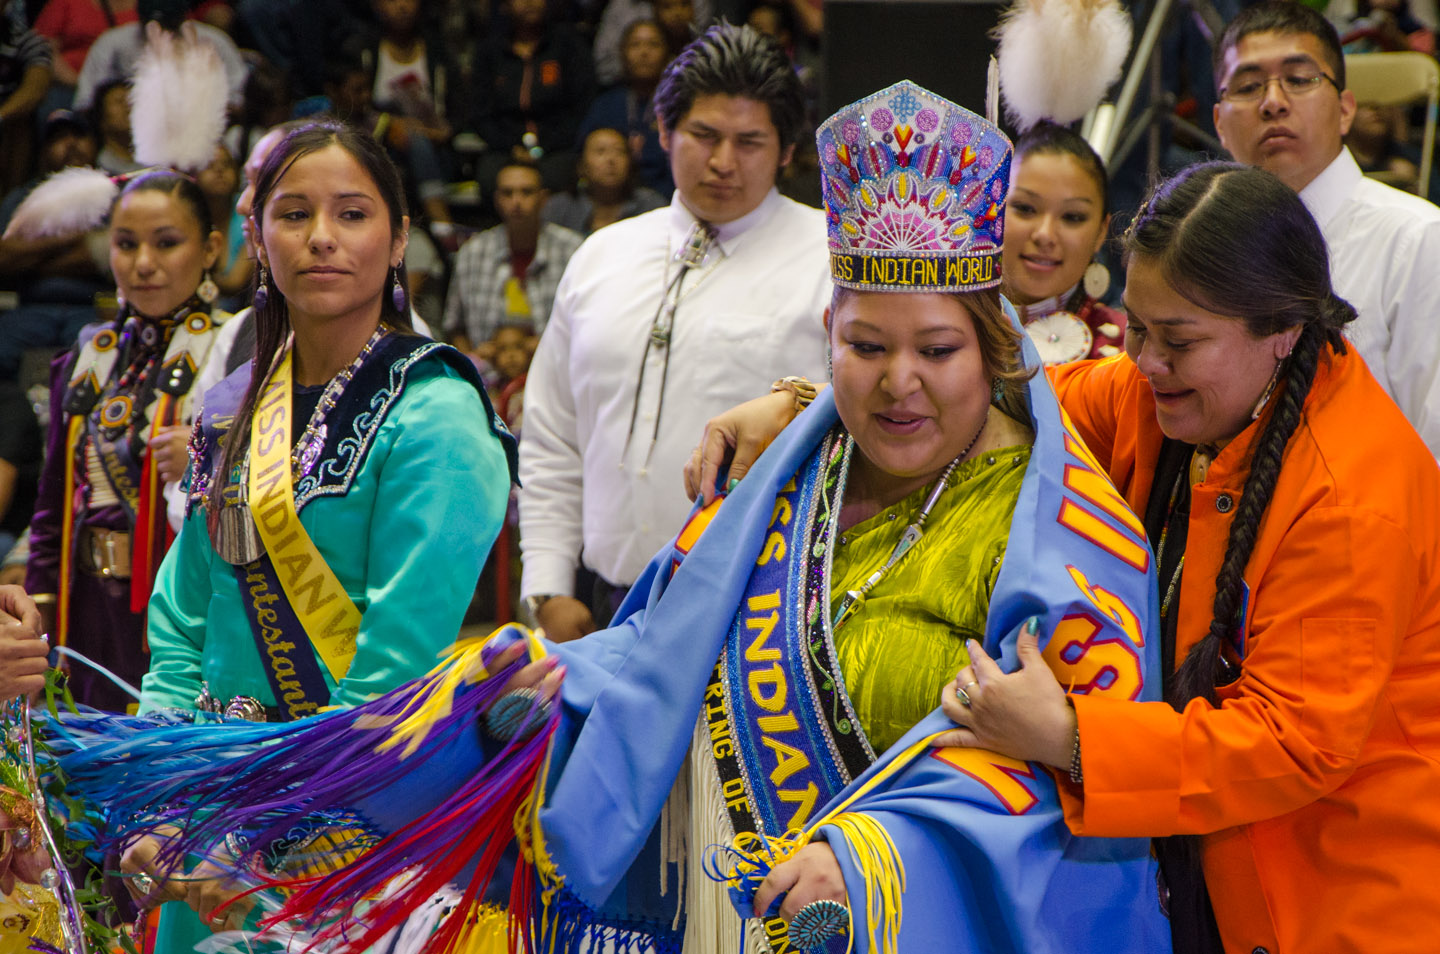 Kansas K. Begaye of the Dine Nation was crowned Miss Indian World 2013 during the powwow.